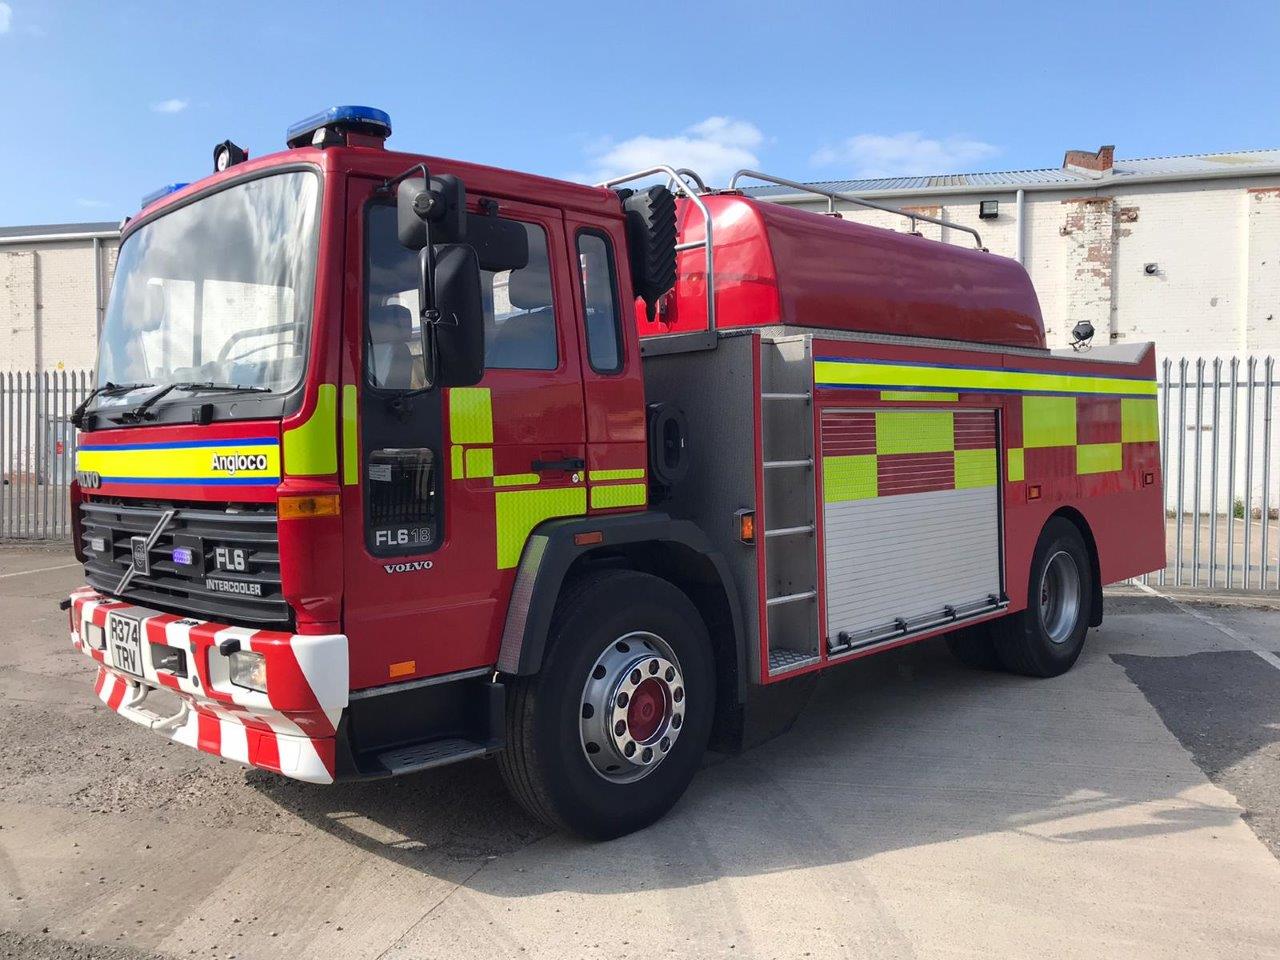 VOLVO FL6 250 Emergency Water Tanker (Fire Engine) - Govsales of mod surplus ex army trucks, ex army land rovers and other military vehicles for sale